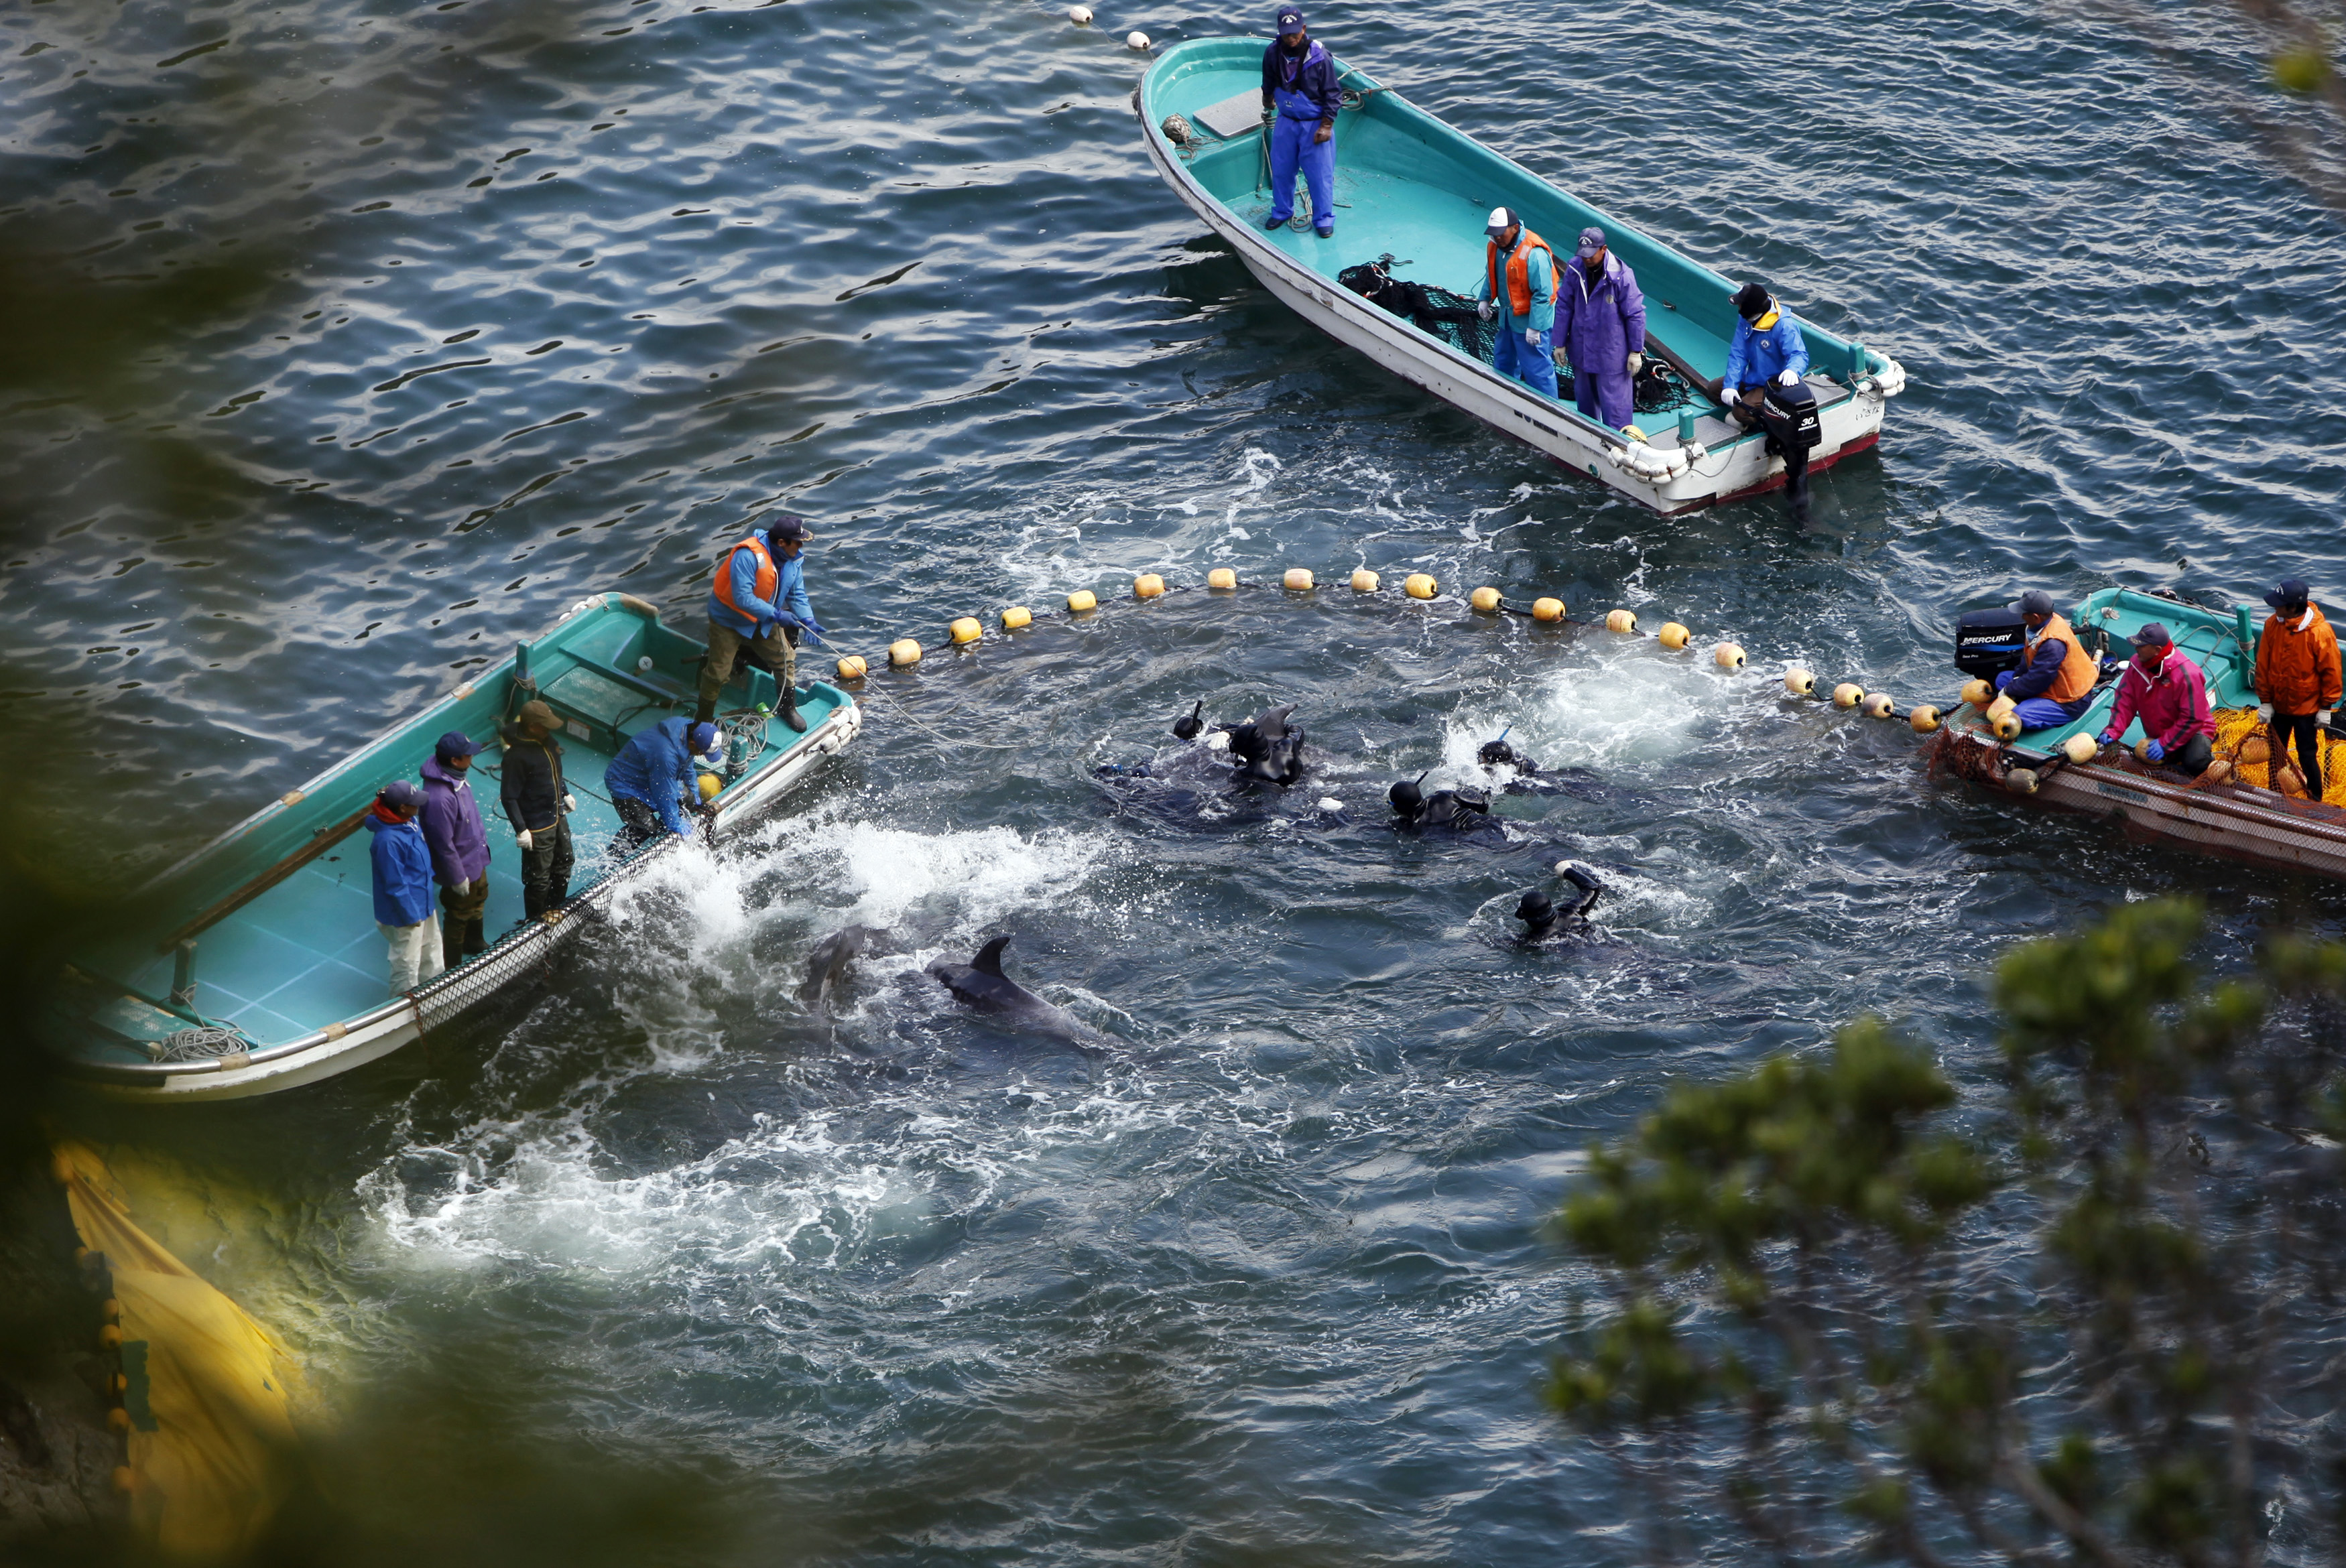 Fishermen in wetsuits hunt dolphins at a cove in Taiji